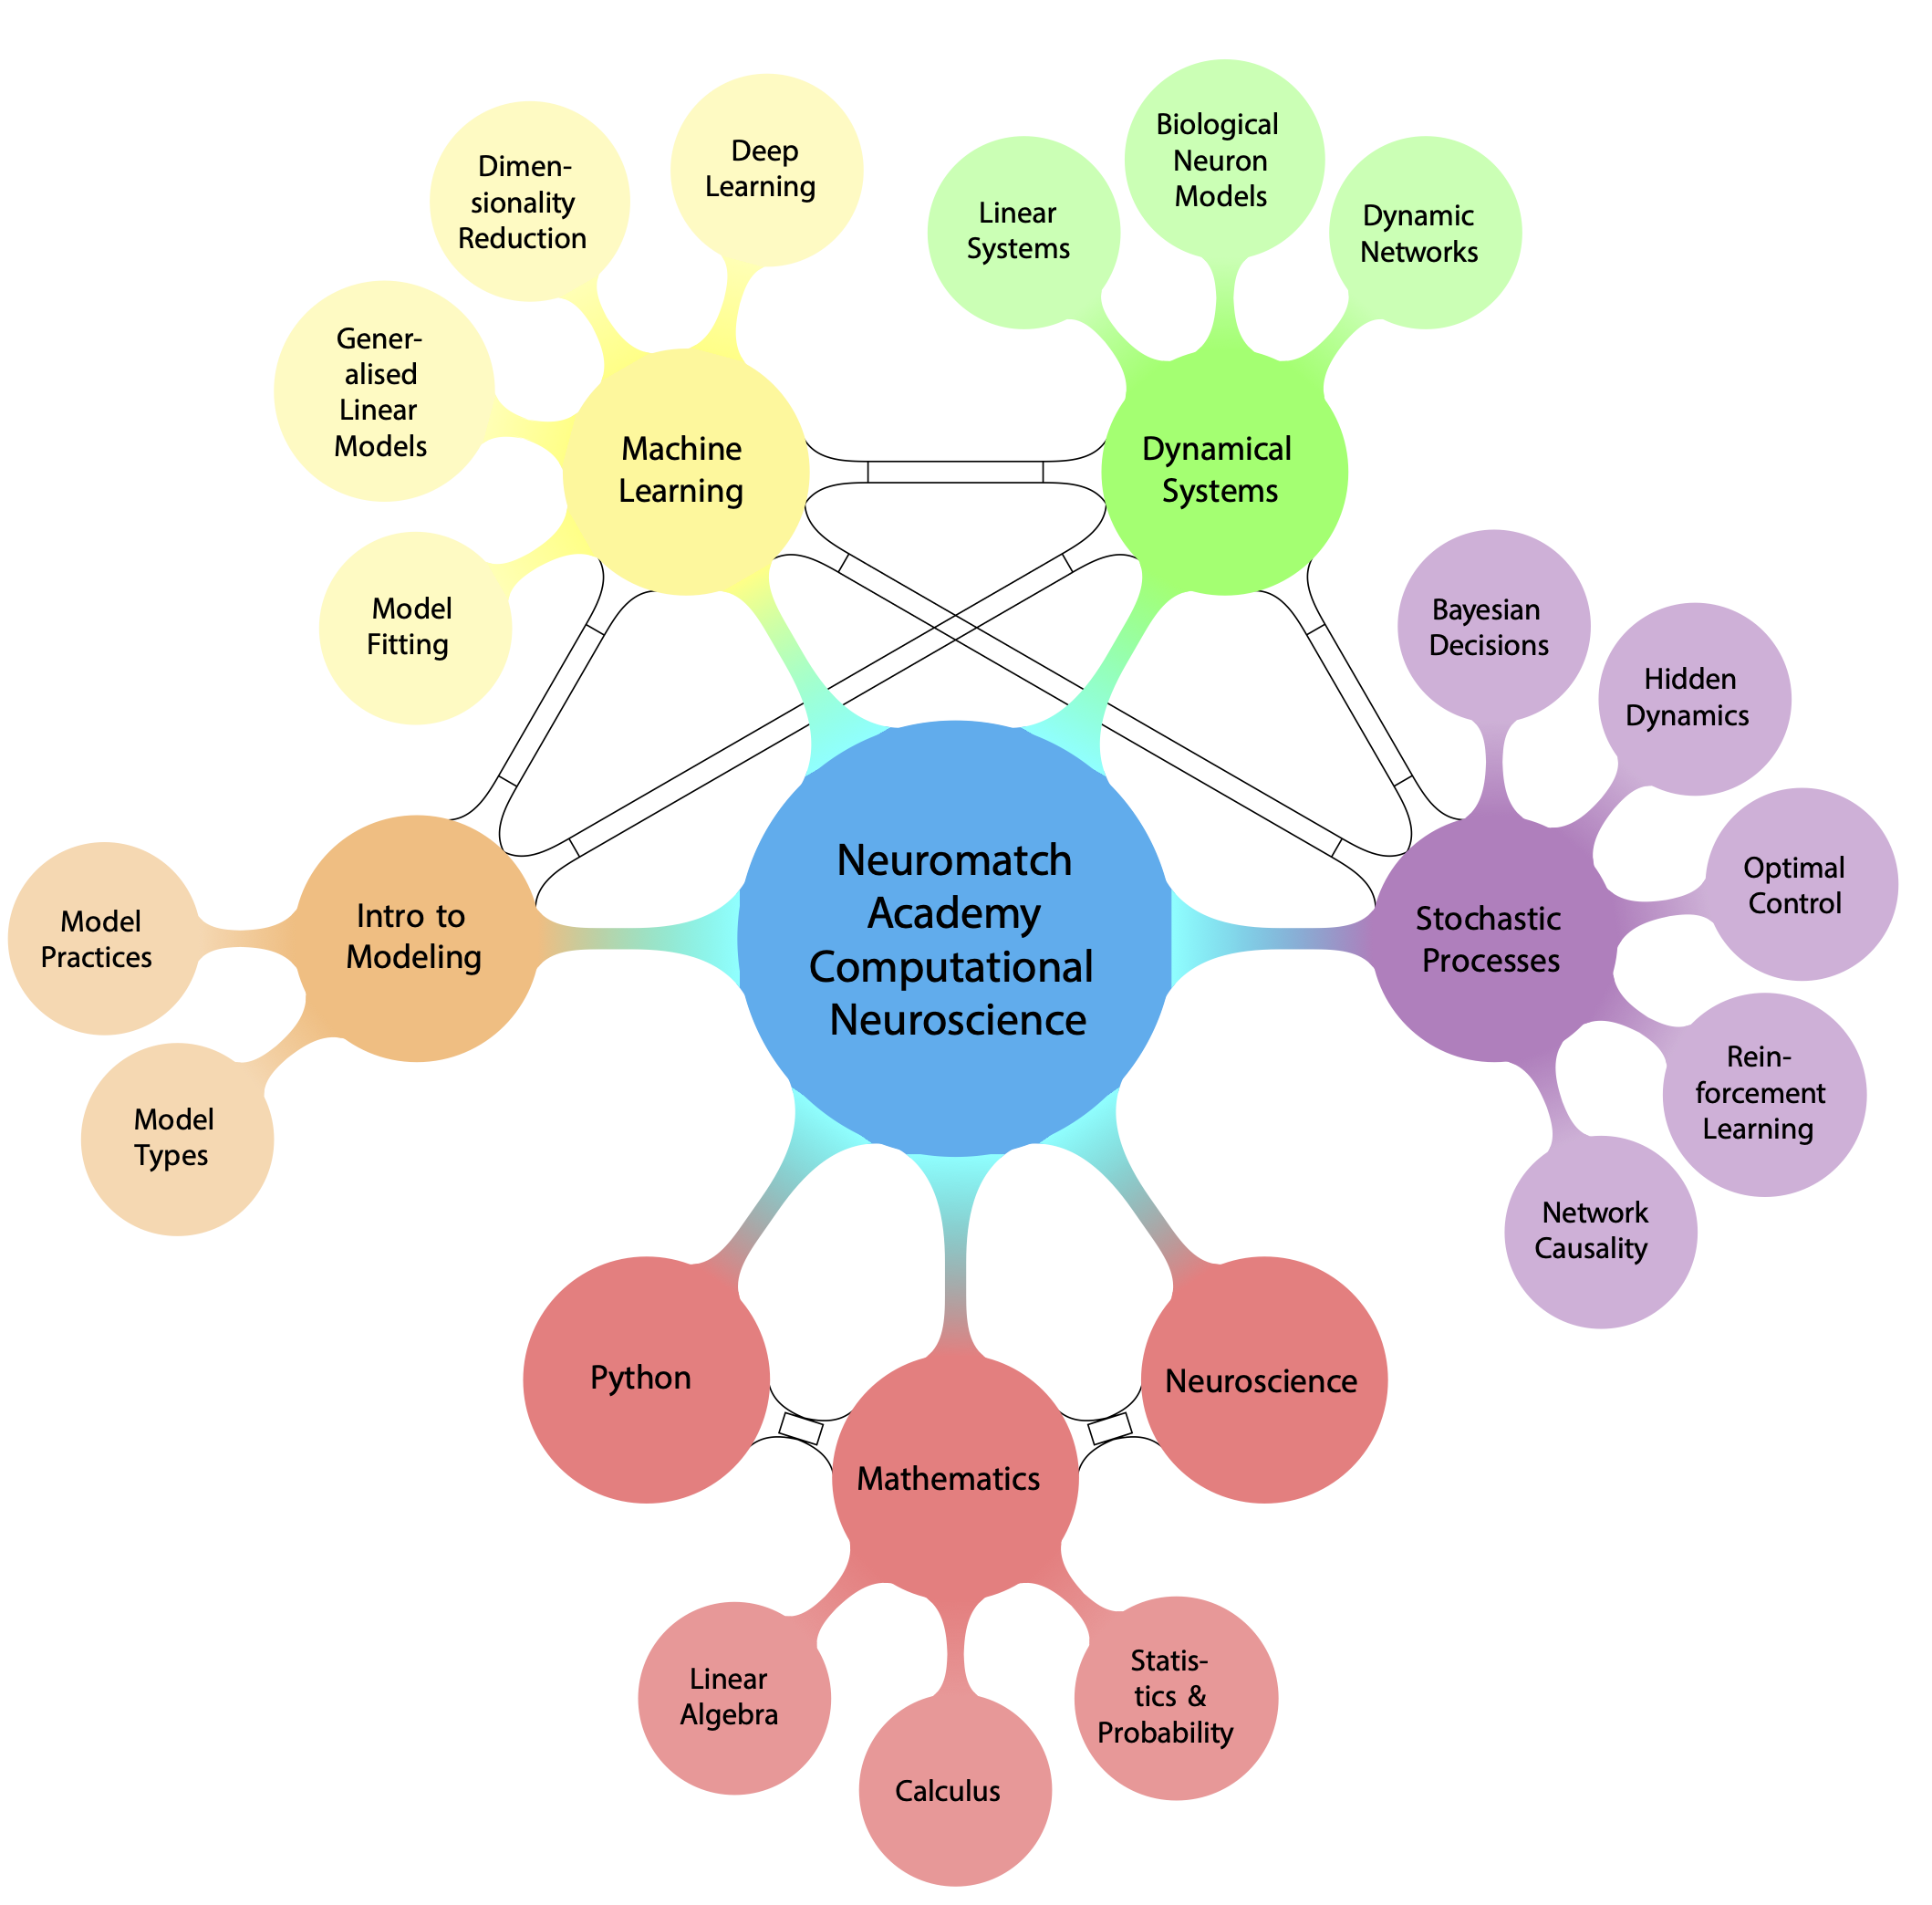 Concept map overview of curriculum